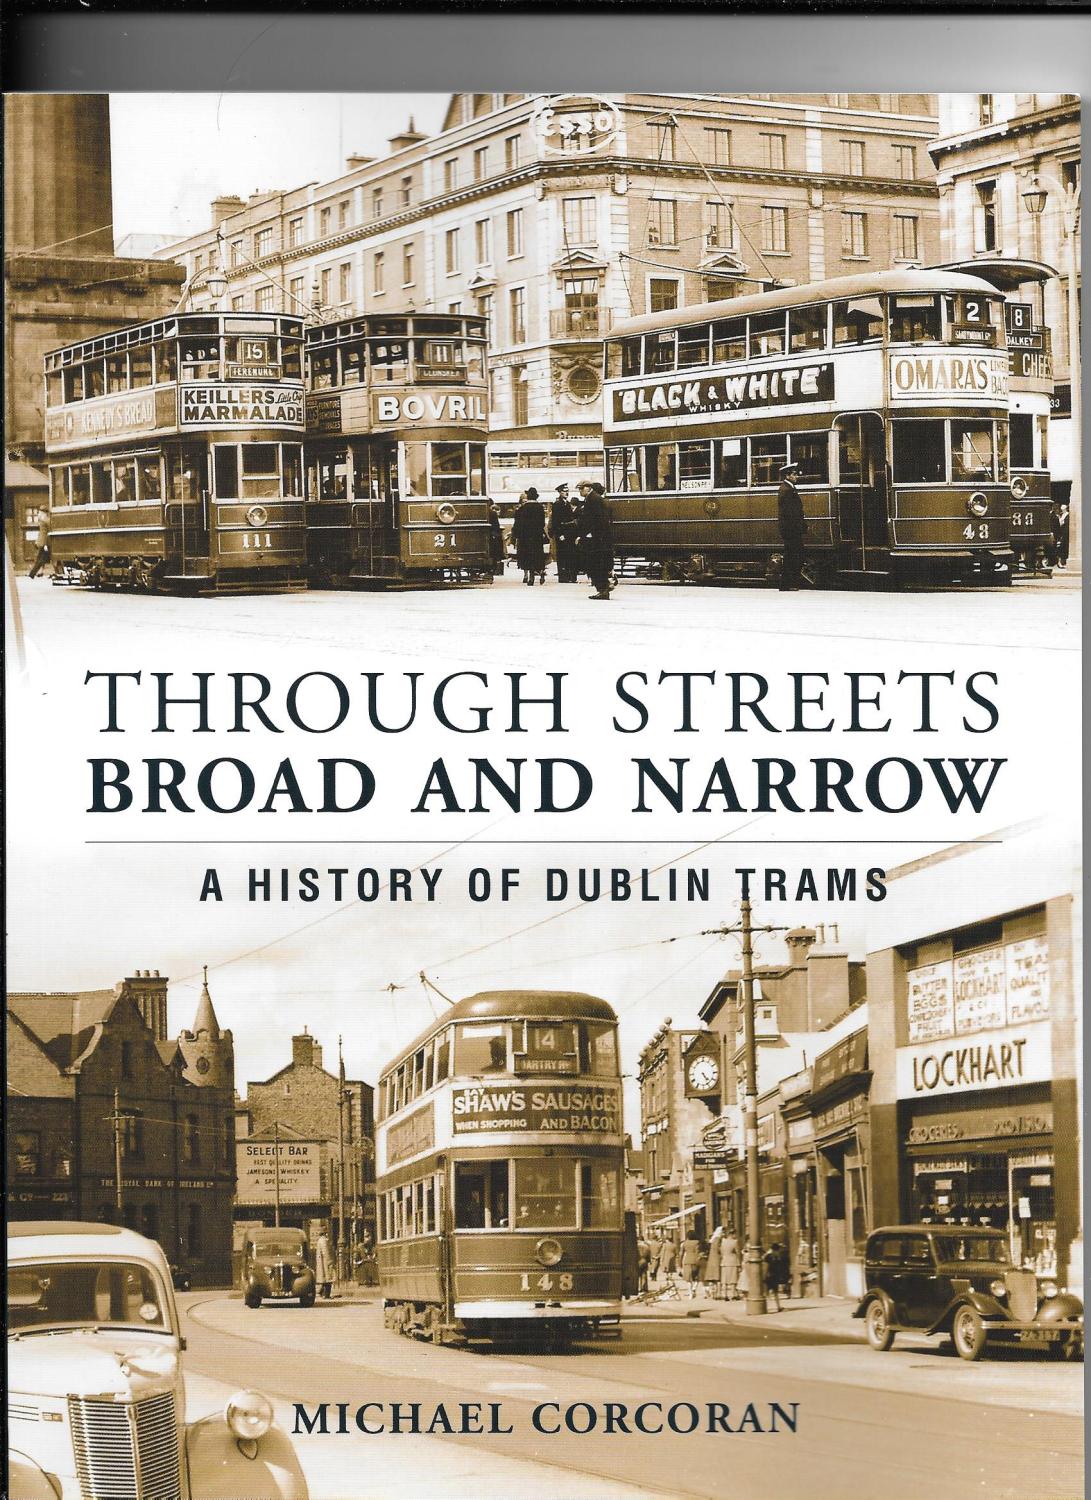 Through Streets Broad and Narrow: A History of Dublin Trams. - Corcoran, Michael.